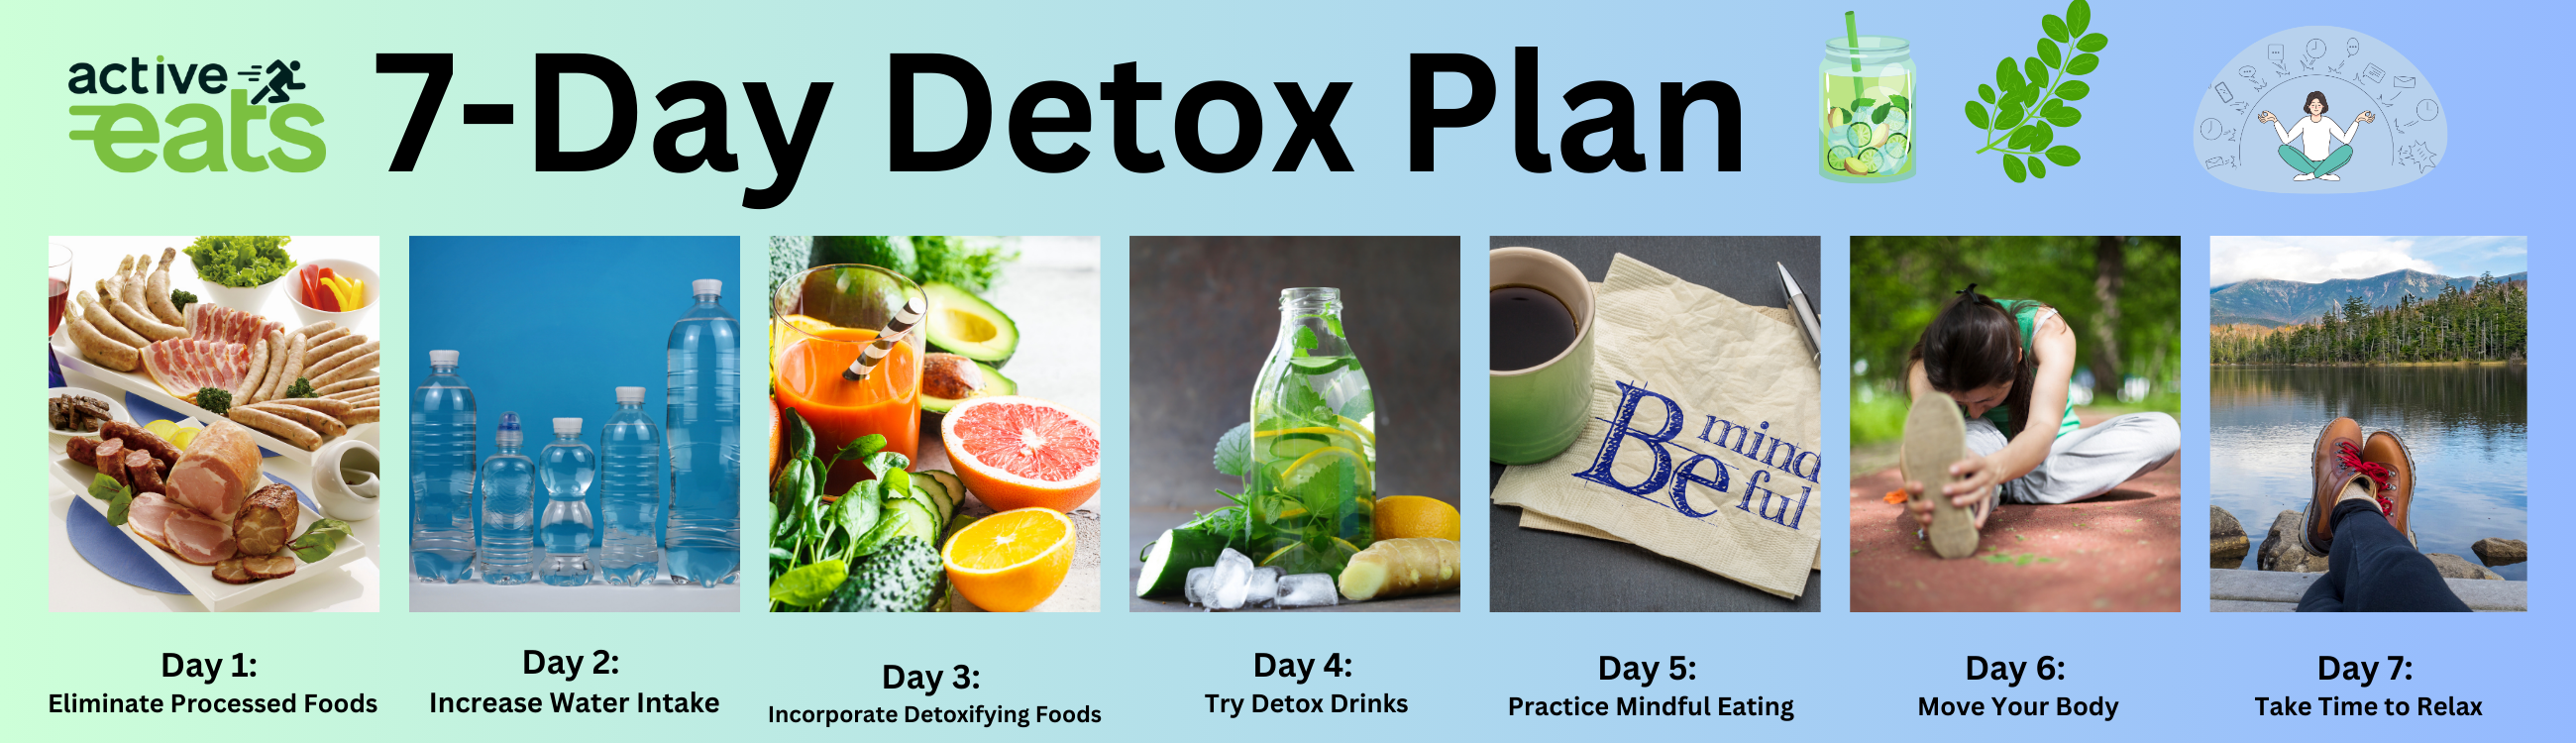 Image: A colorful and appealing infographic representing a 7-Day Detox Plan. The infographic displays a week-long calendar with daily sections, each containing icons representing healthy food, exercise, hydration, and relaxation. It conveys a sense of vitality and well-being, encouraging a balanced and healthy lifestyle.